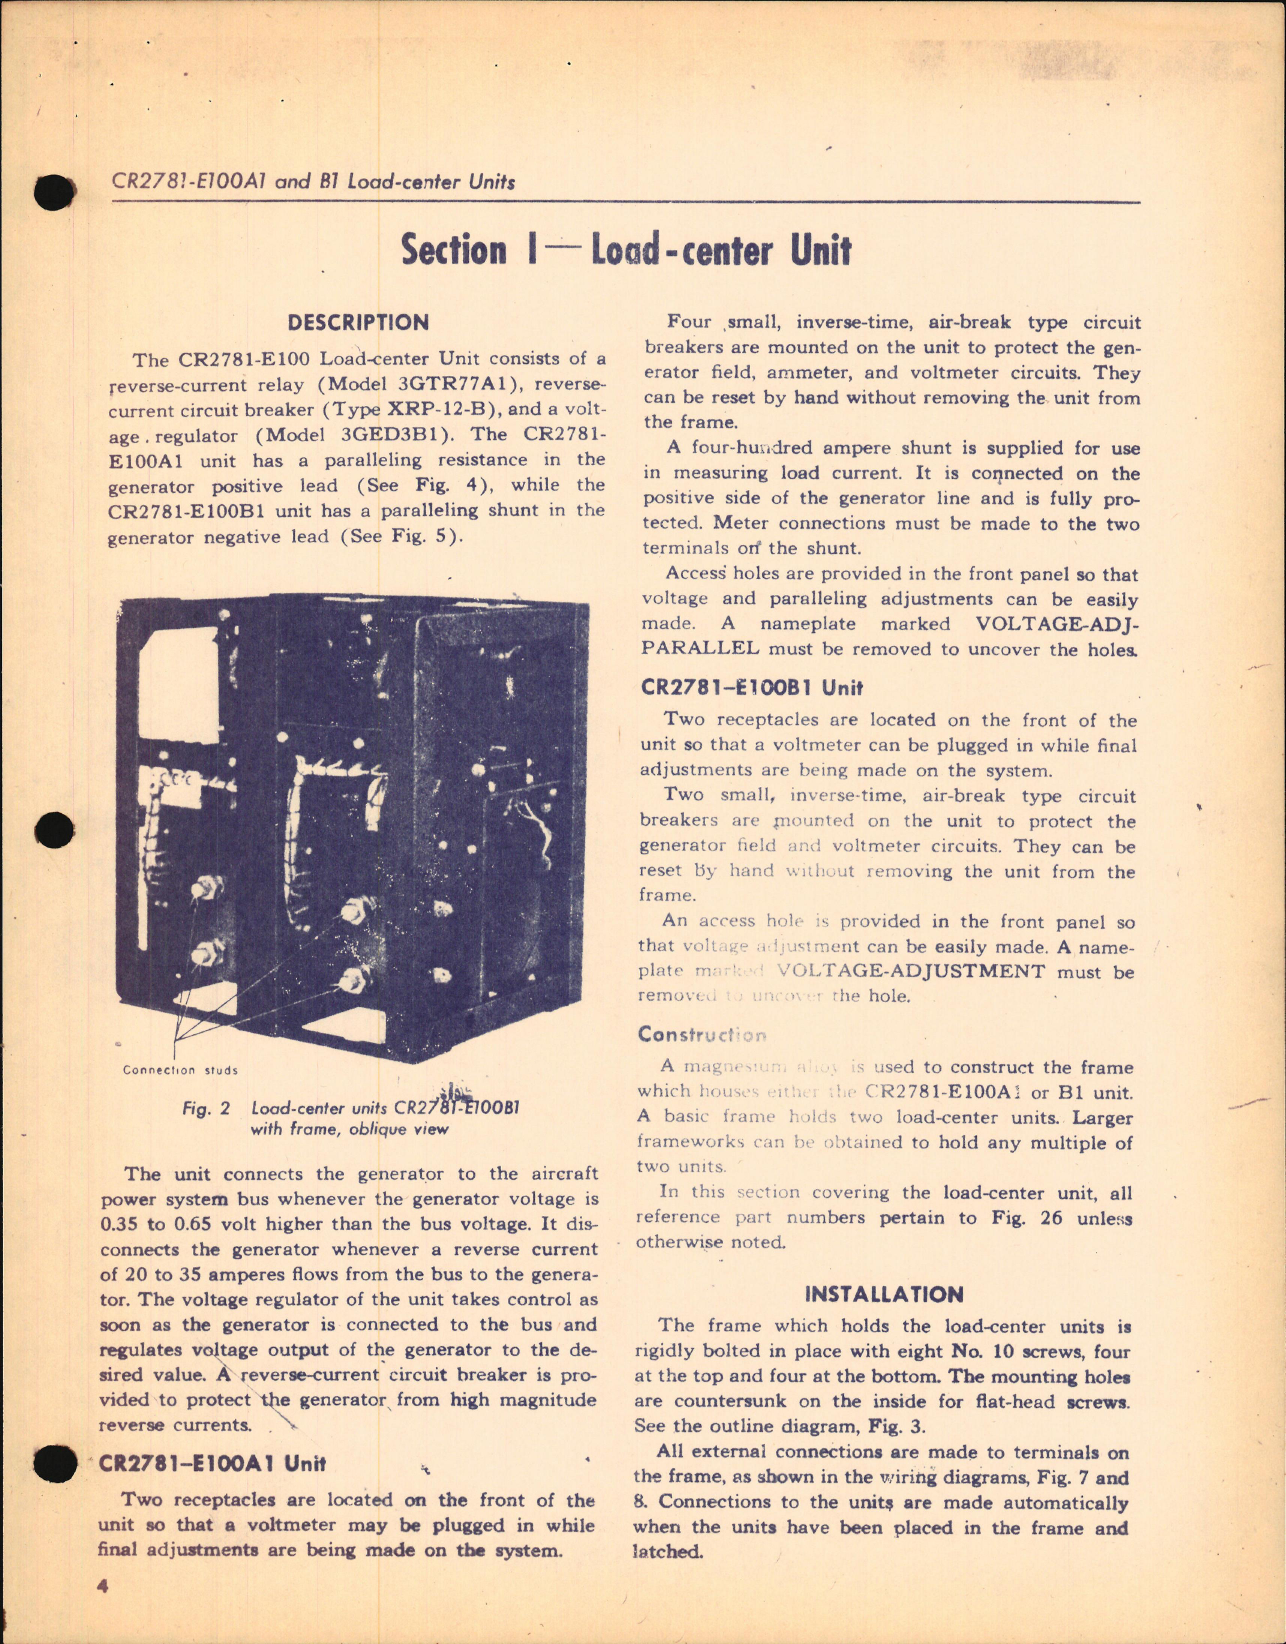 Sample page 6 from AirCorps Library document: Instructions for GEI-24132 Load-Center Units CR2781-E100A1 and B1